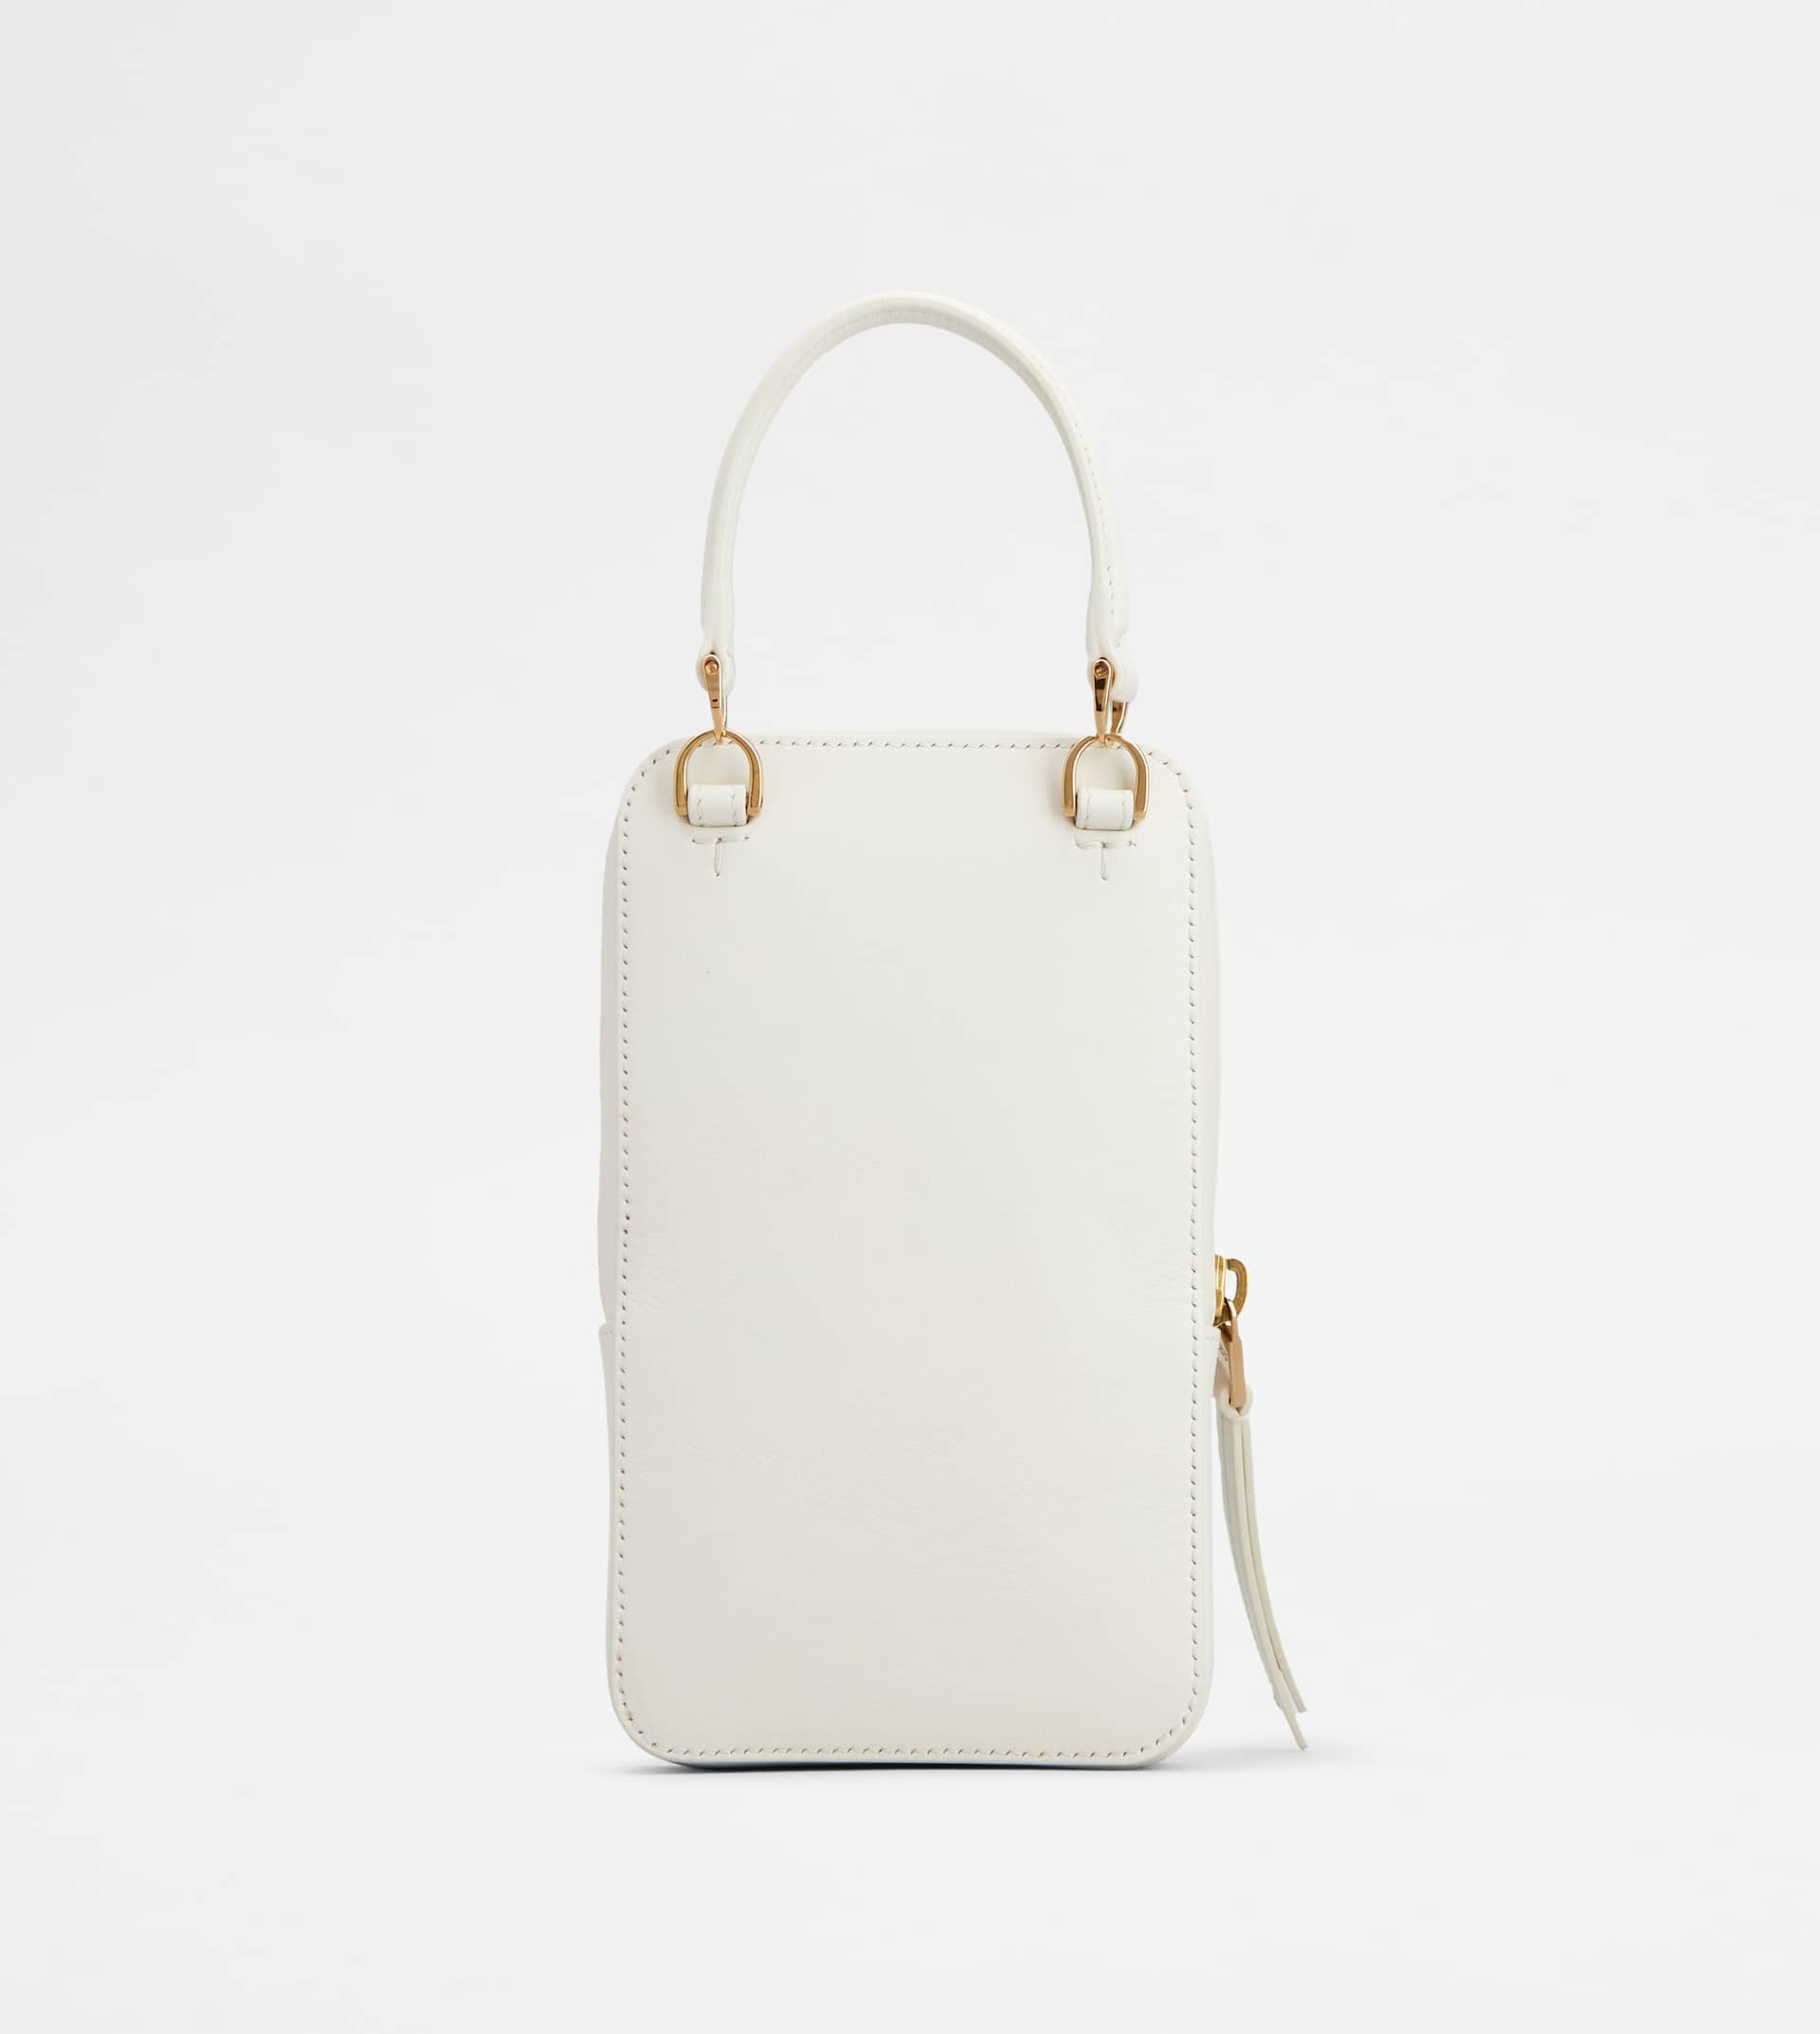 T TIMELESS PHONE BAG IN LEATHER MEDIUM - OFF WHITE - 2